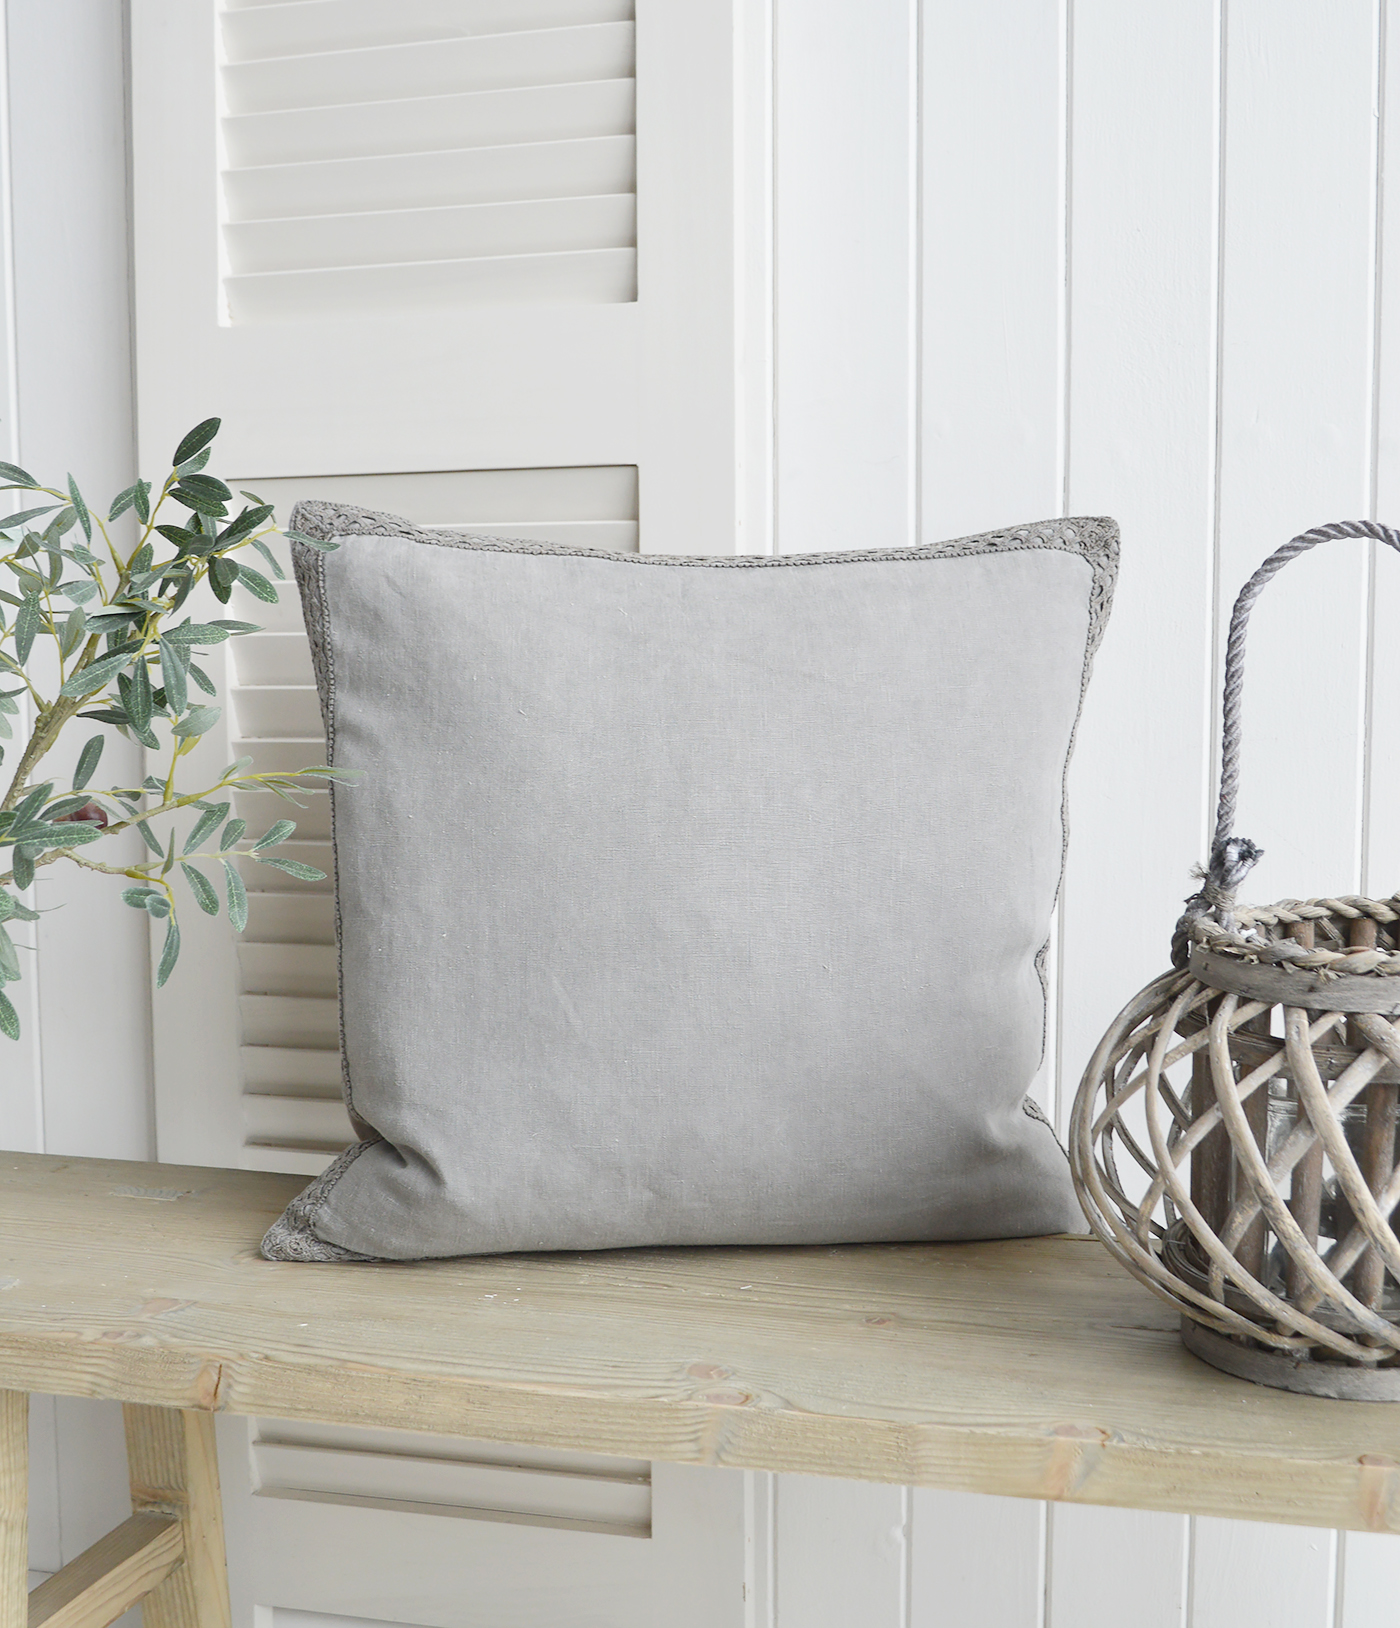 The White Lighthouse. New England Style Country, Coastal and White Furniture and accessories for the home. Richmond 100% stonewashed Linen Feather Filled Cushion